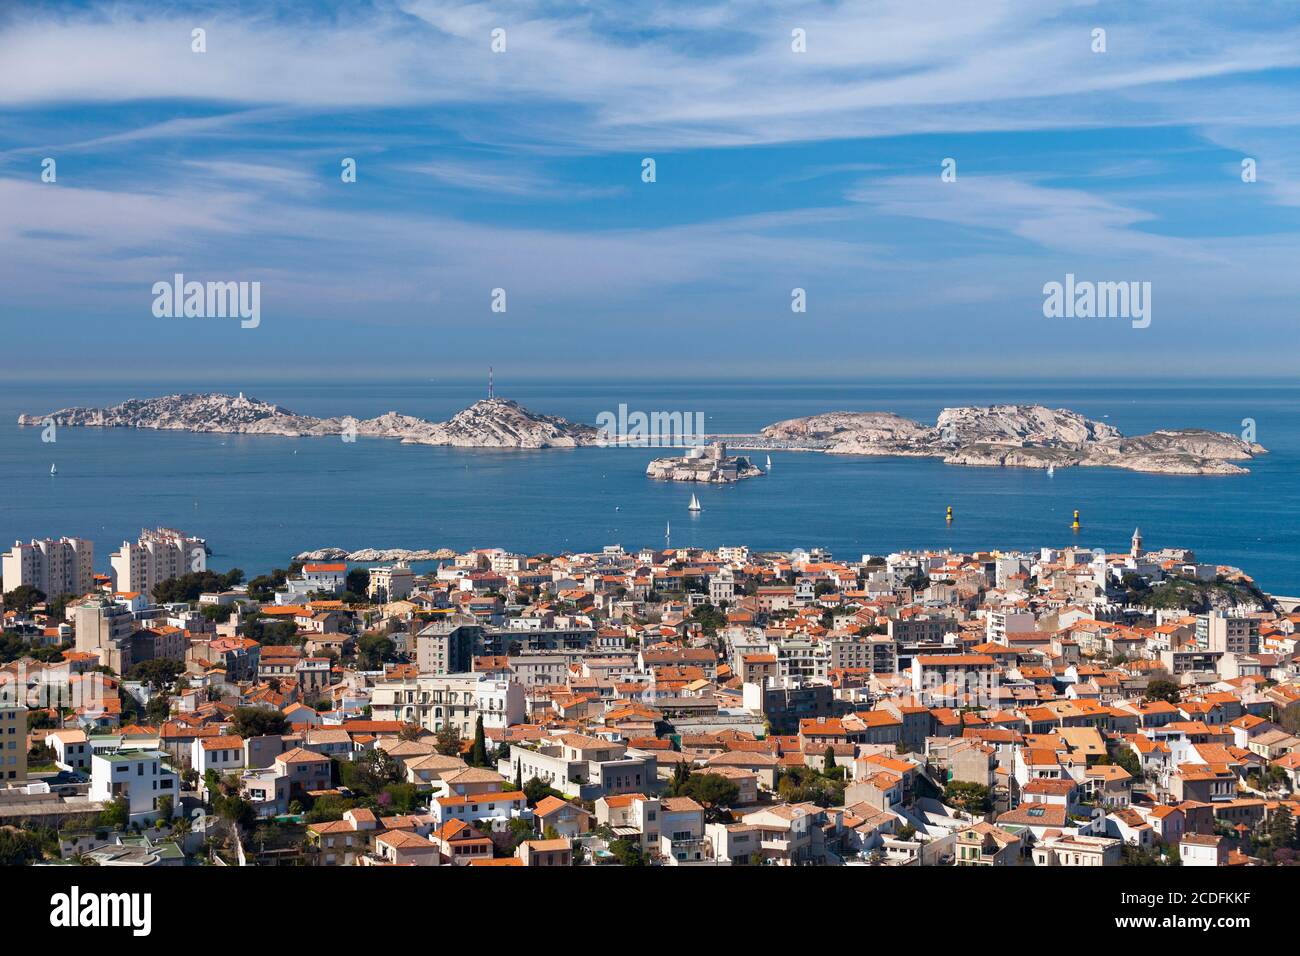 Aerial View Of The District Of Le Pharo With Off The Coast Of Marseille A Small Archipelago Called Les Iles The Islands In English Stock Photo Alamy